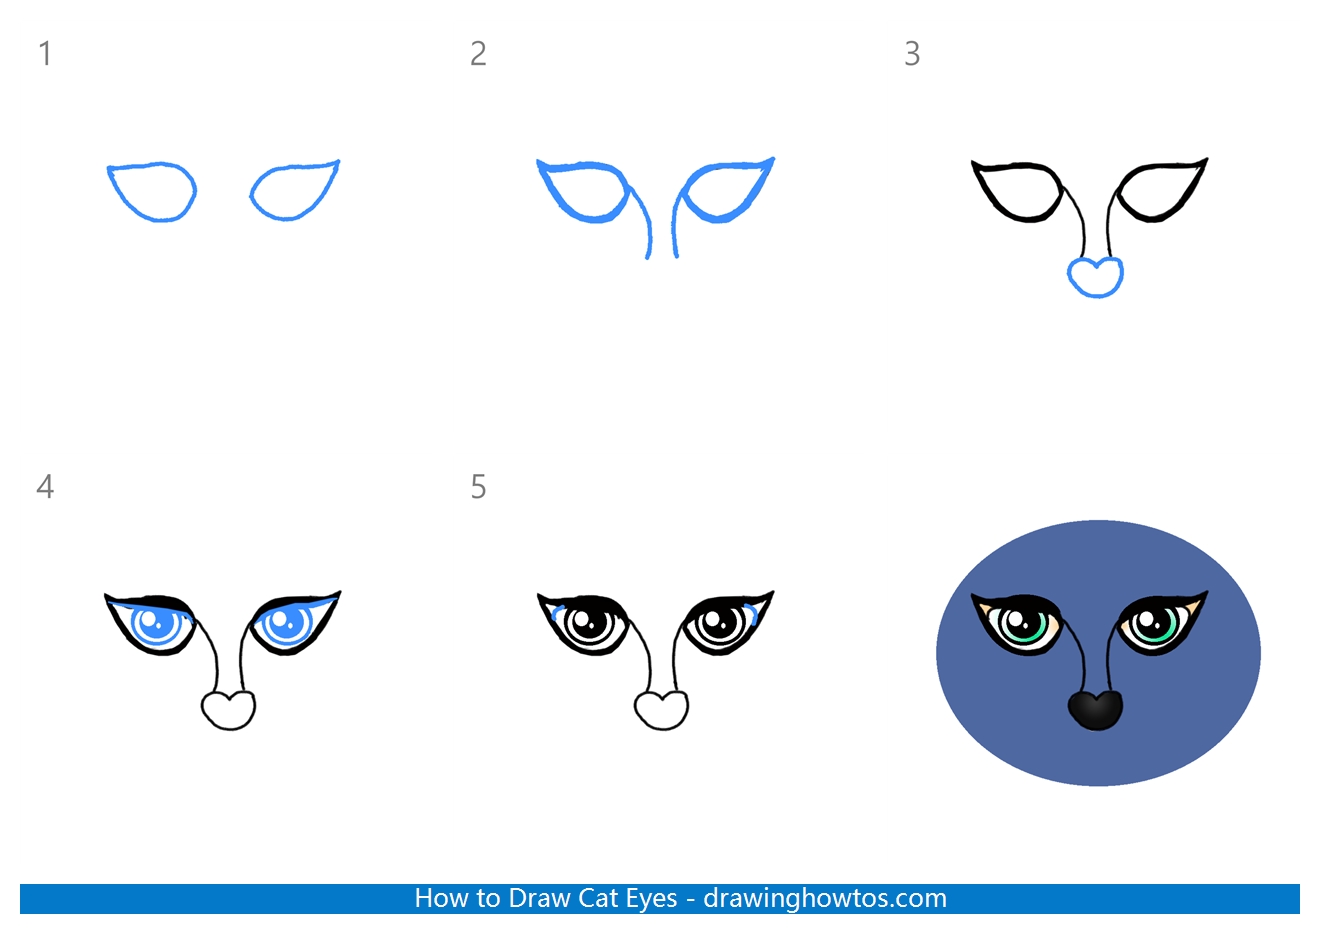 How to Draw Cat Eyes Step by Step